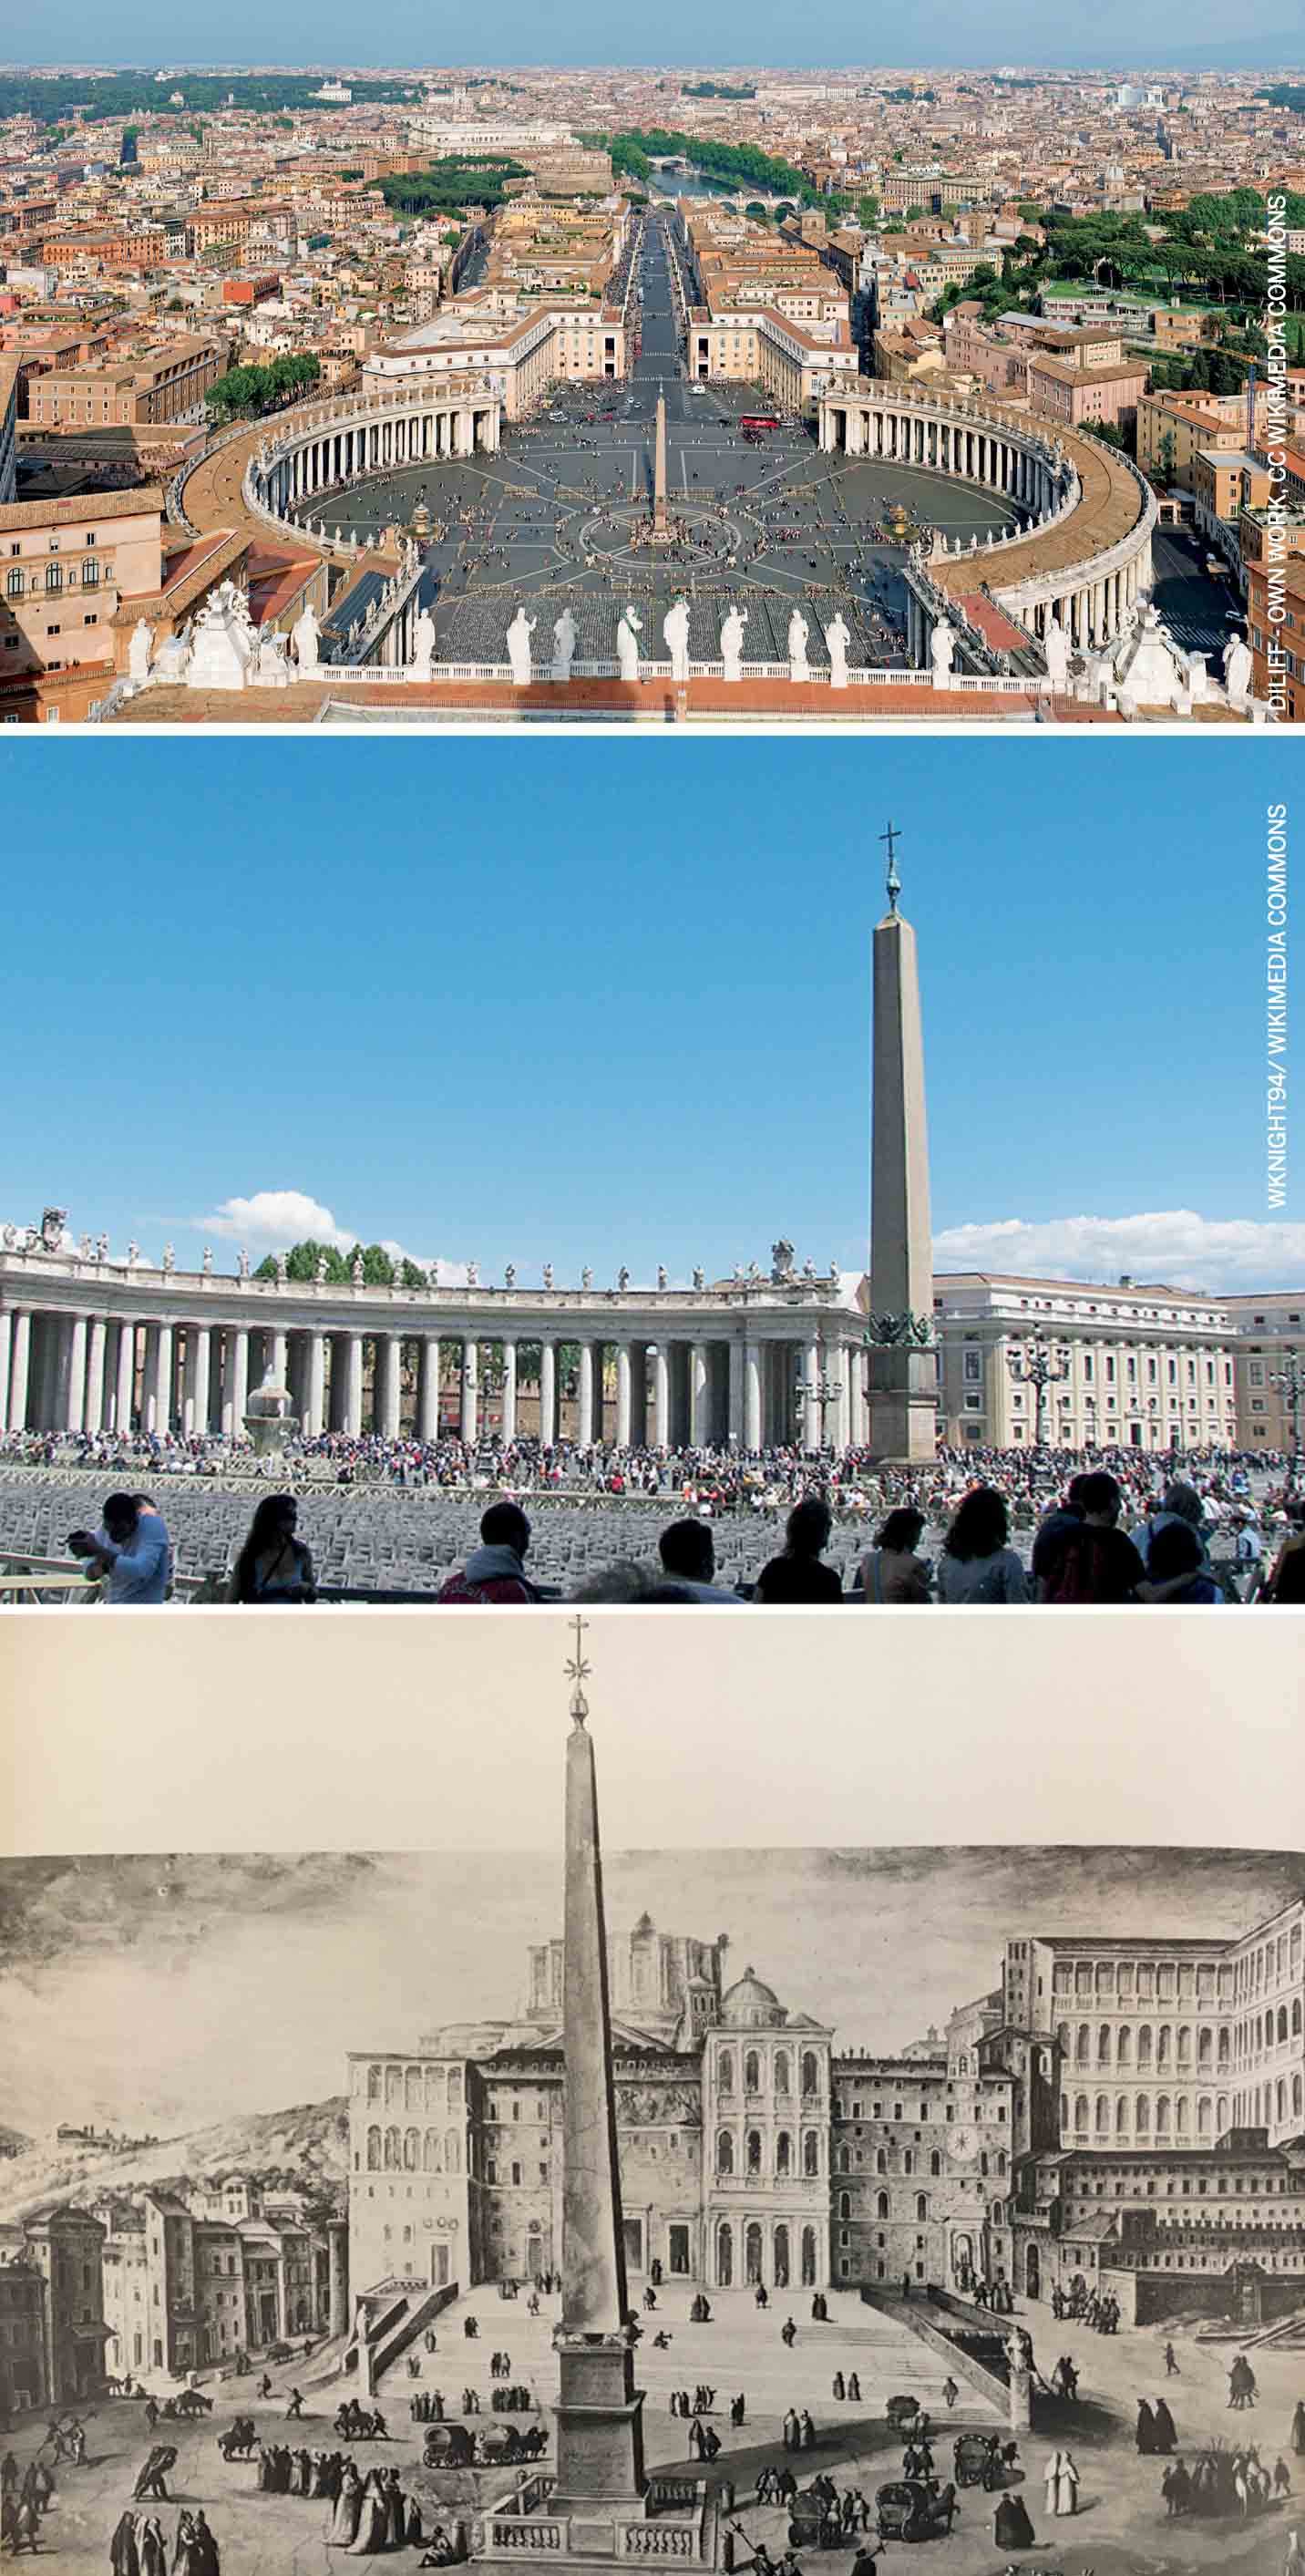 sculpting-organised-urban-design-placement-obelisk-unstructured-space-sixtus-v-st-peters-basilica-rome-centre-great-oval-colonnade-bernini-which-defines-magnificent-urban-space-painting-depicting-square-place-time-sixtus-death